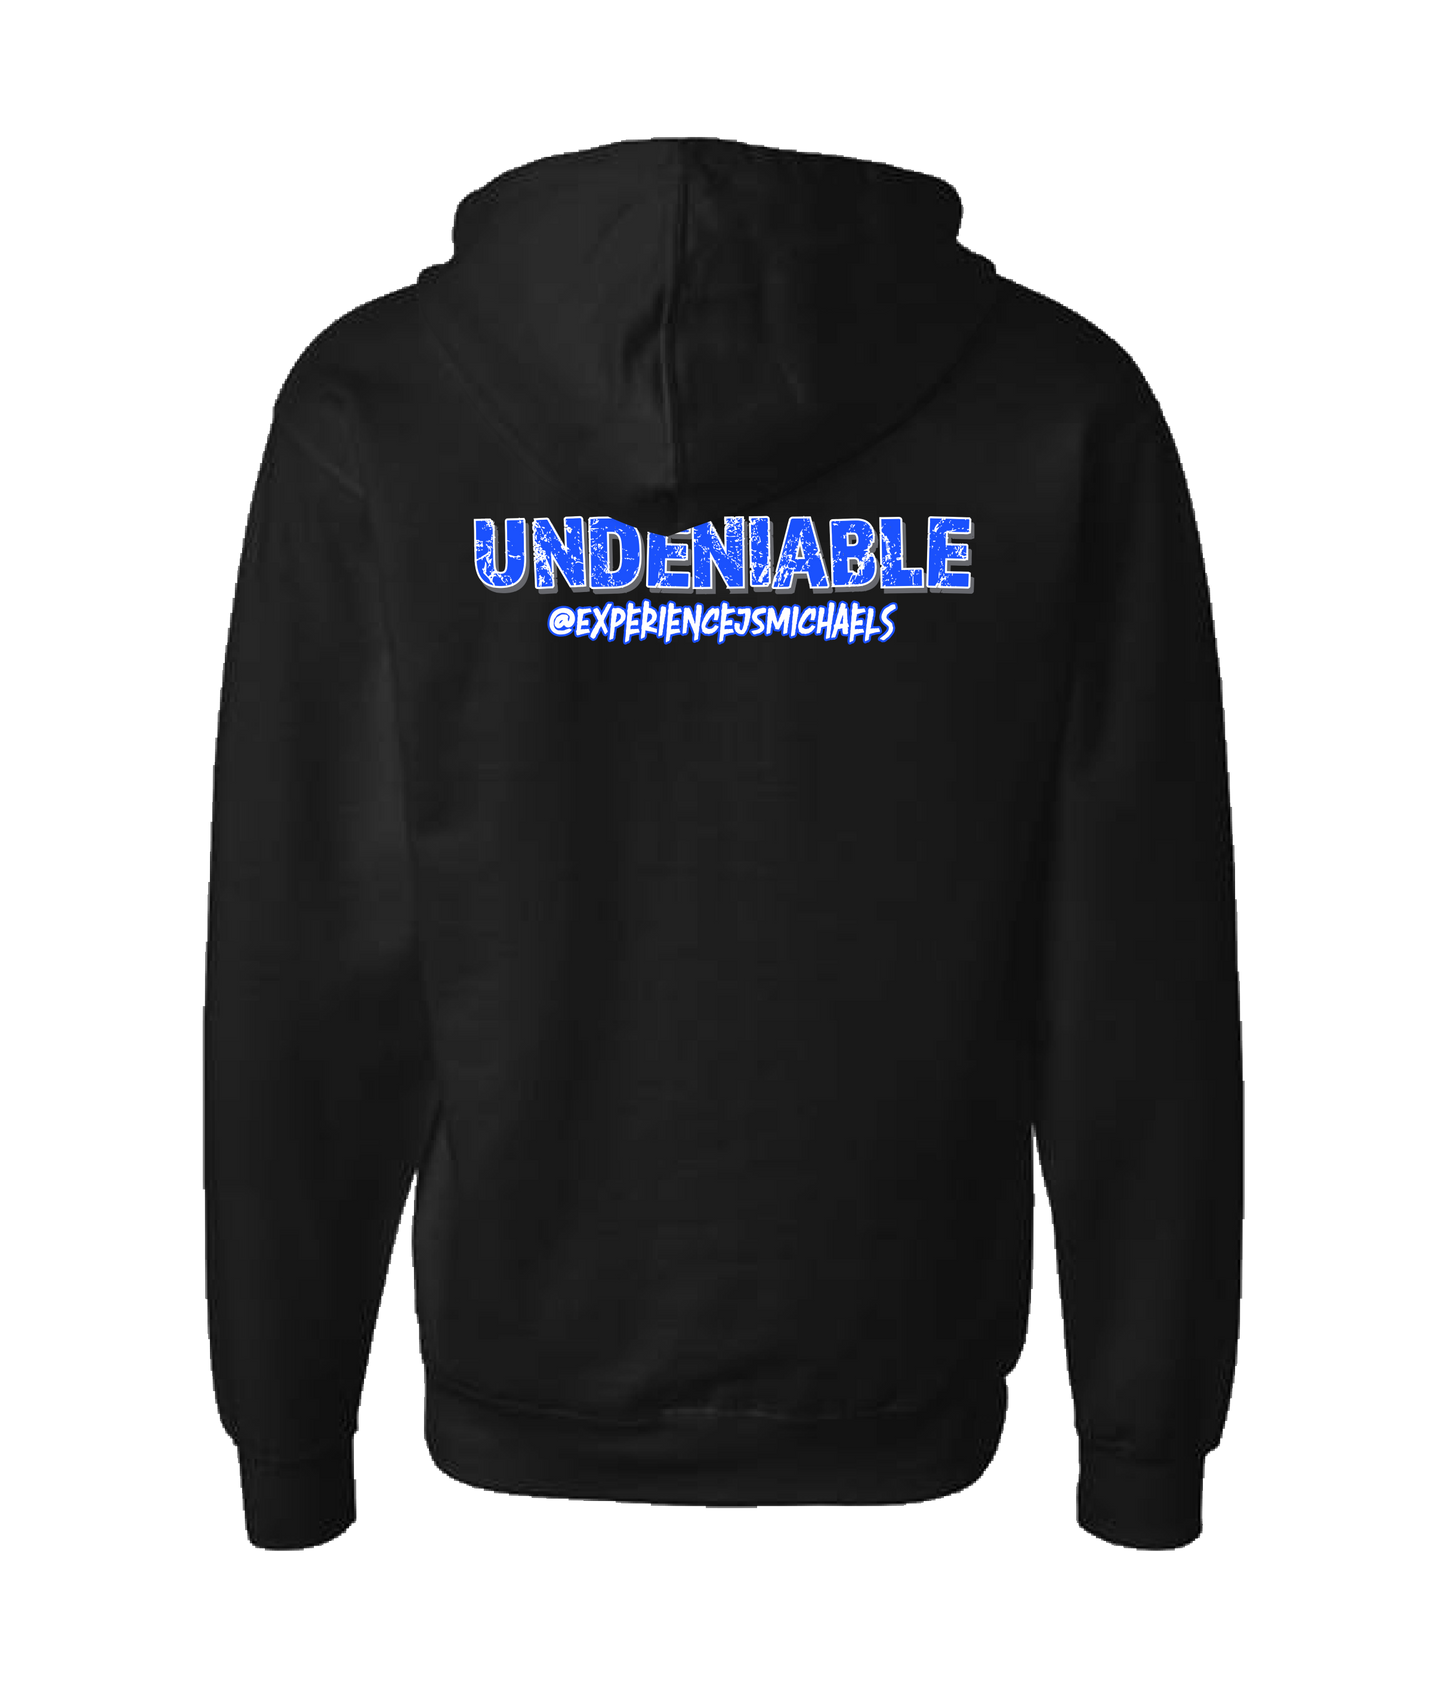 The Experience JS Michaels - UNDENIABLE - Black Zip Up Hoodie